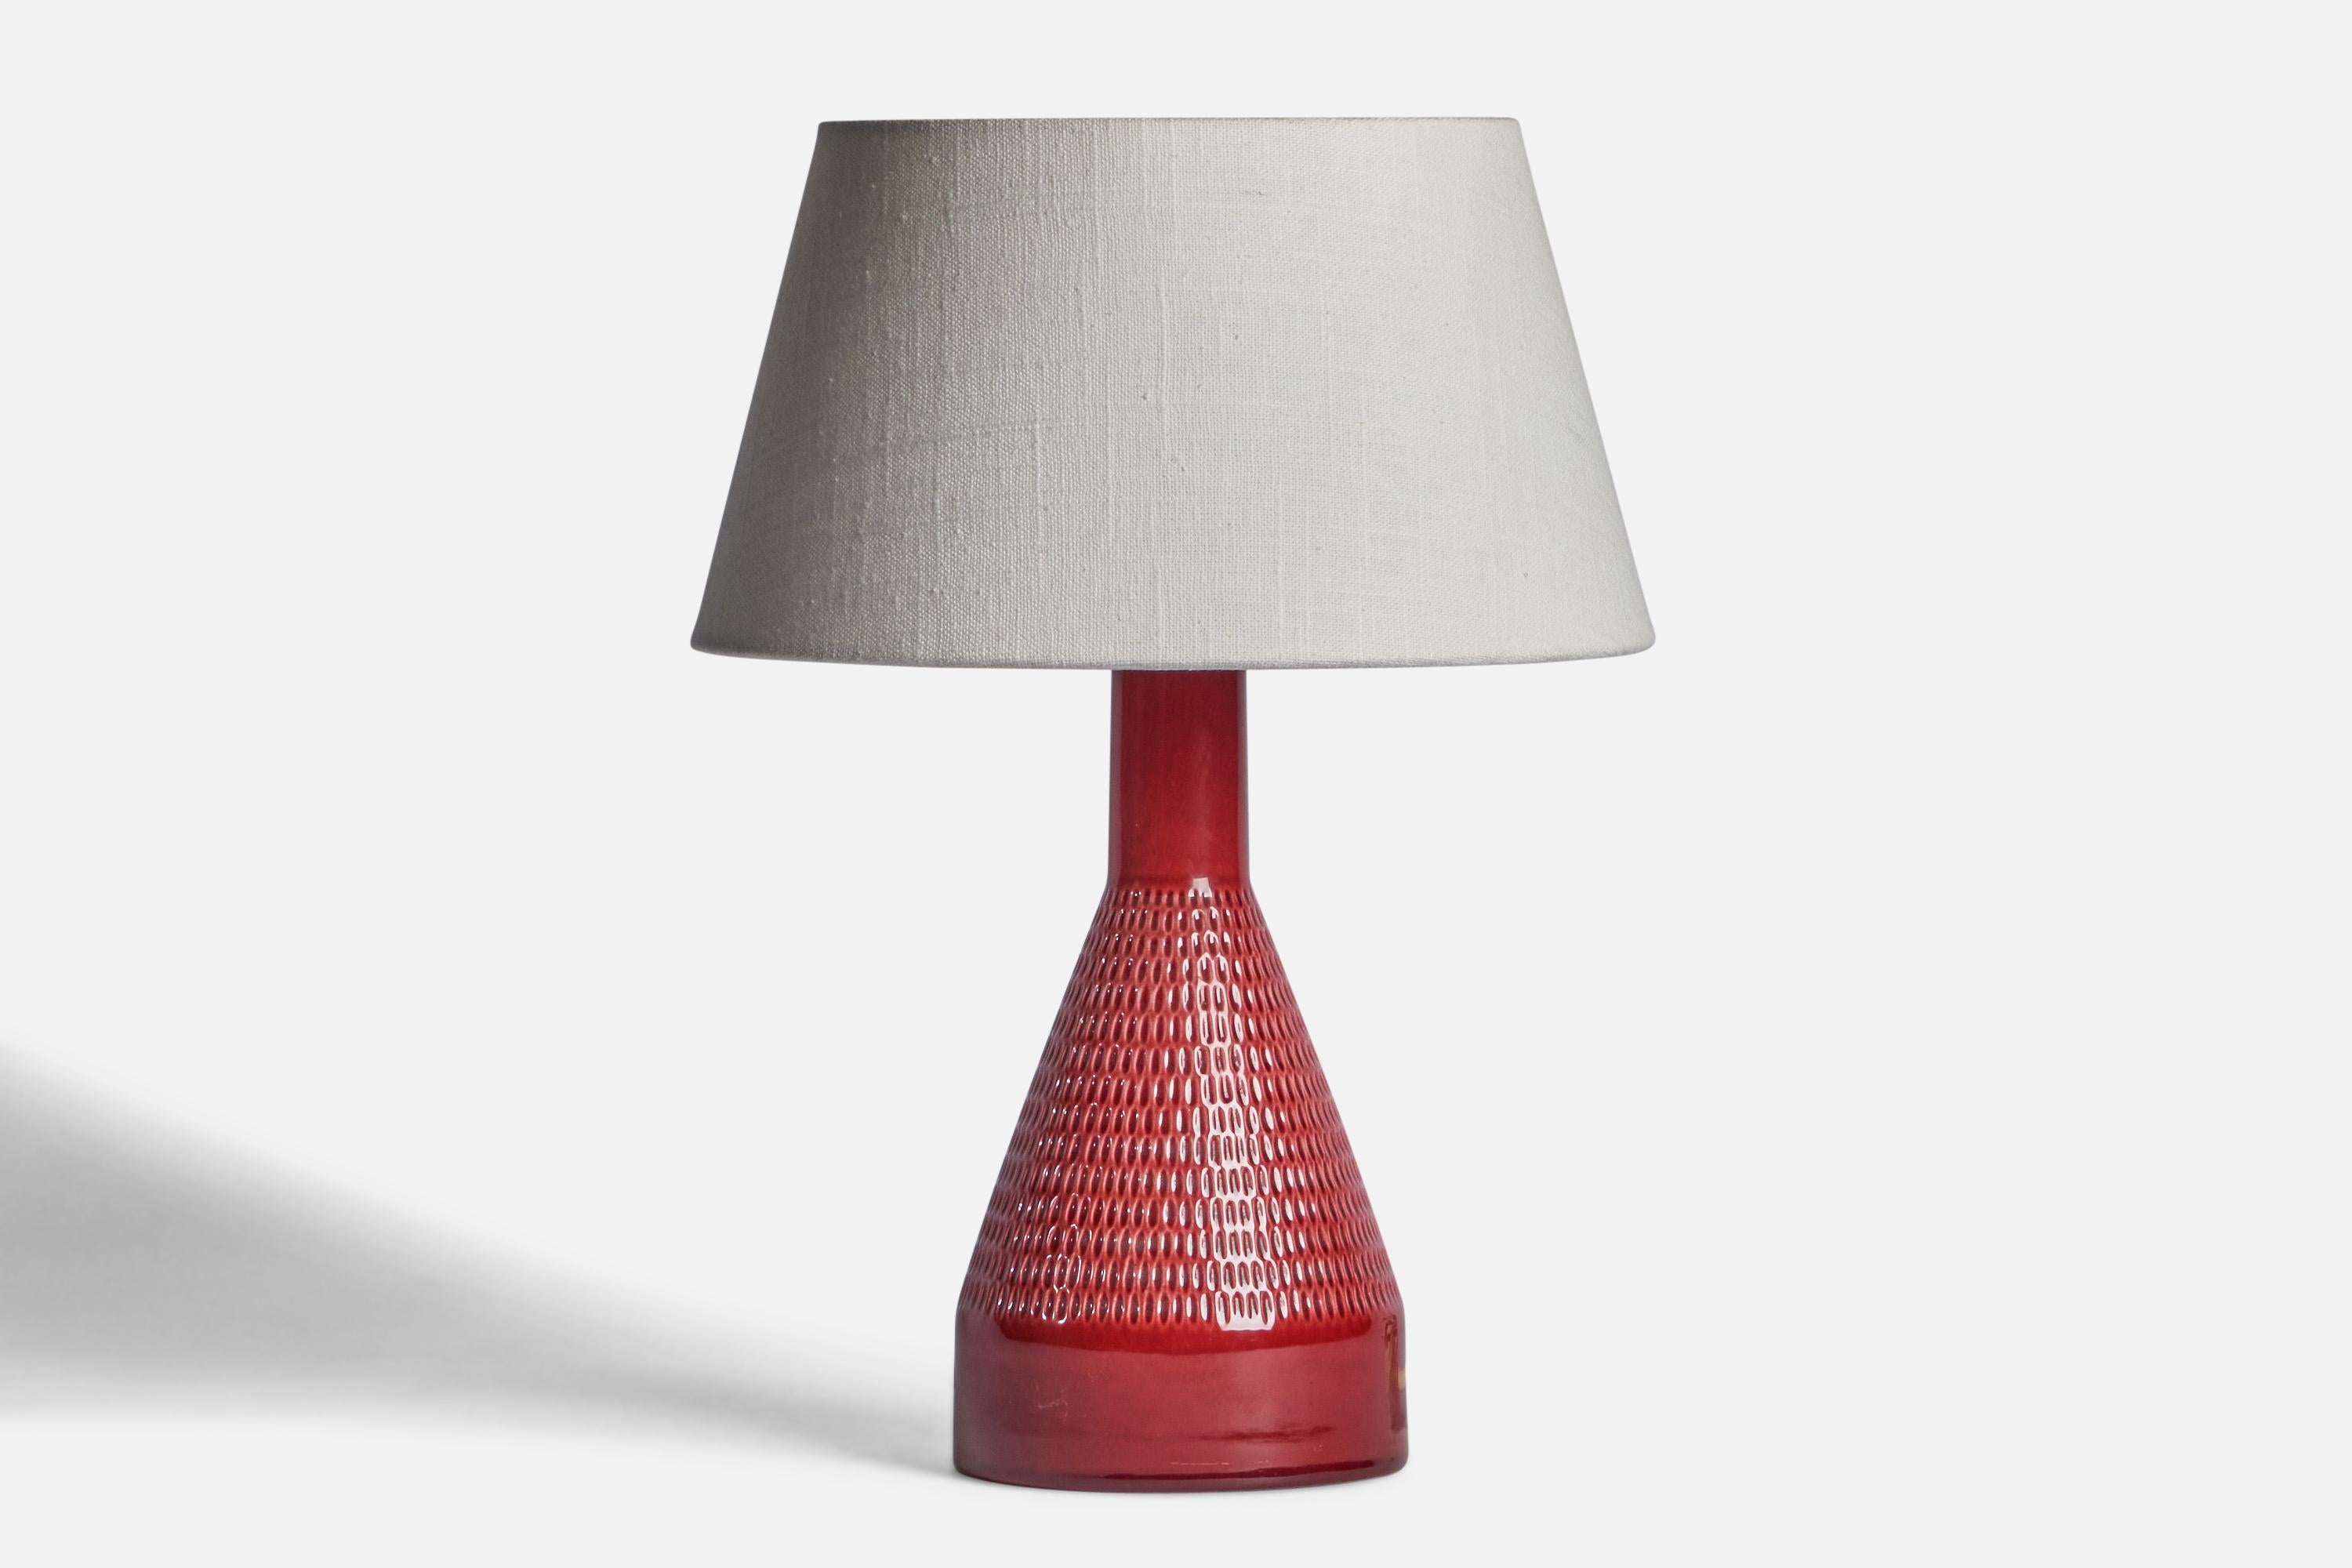 A red-glazed and incised stoneware table lamp produced by Rörstrand, Sweden, c. 1960s.

Dimensions of Lamp (inches): 11.25” H x 4.75” Diameter
Dimensions of Shade (inches): 7” Top Diameter x 10” Bottom Diameter x 5.5” H 
Dimensions of Lamp with